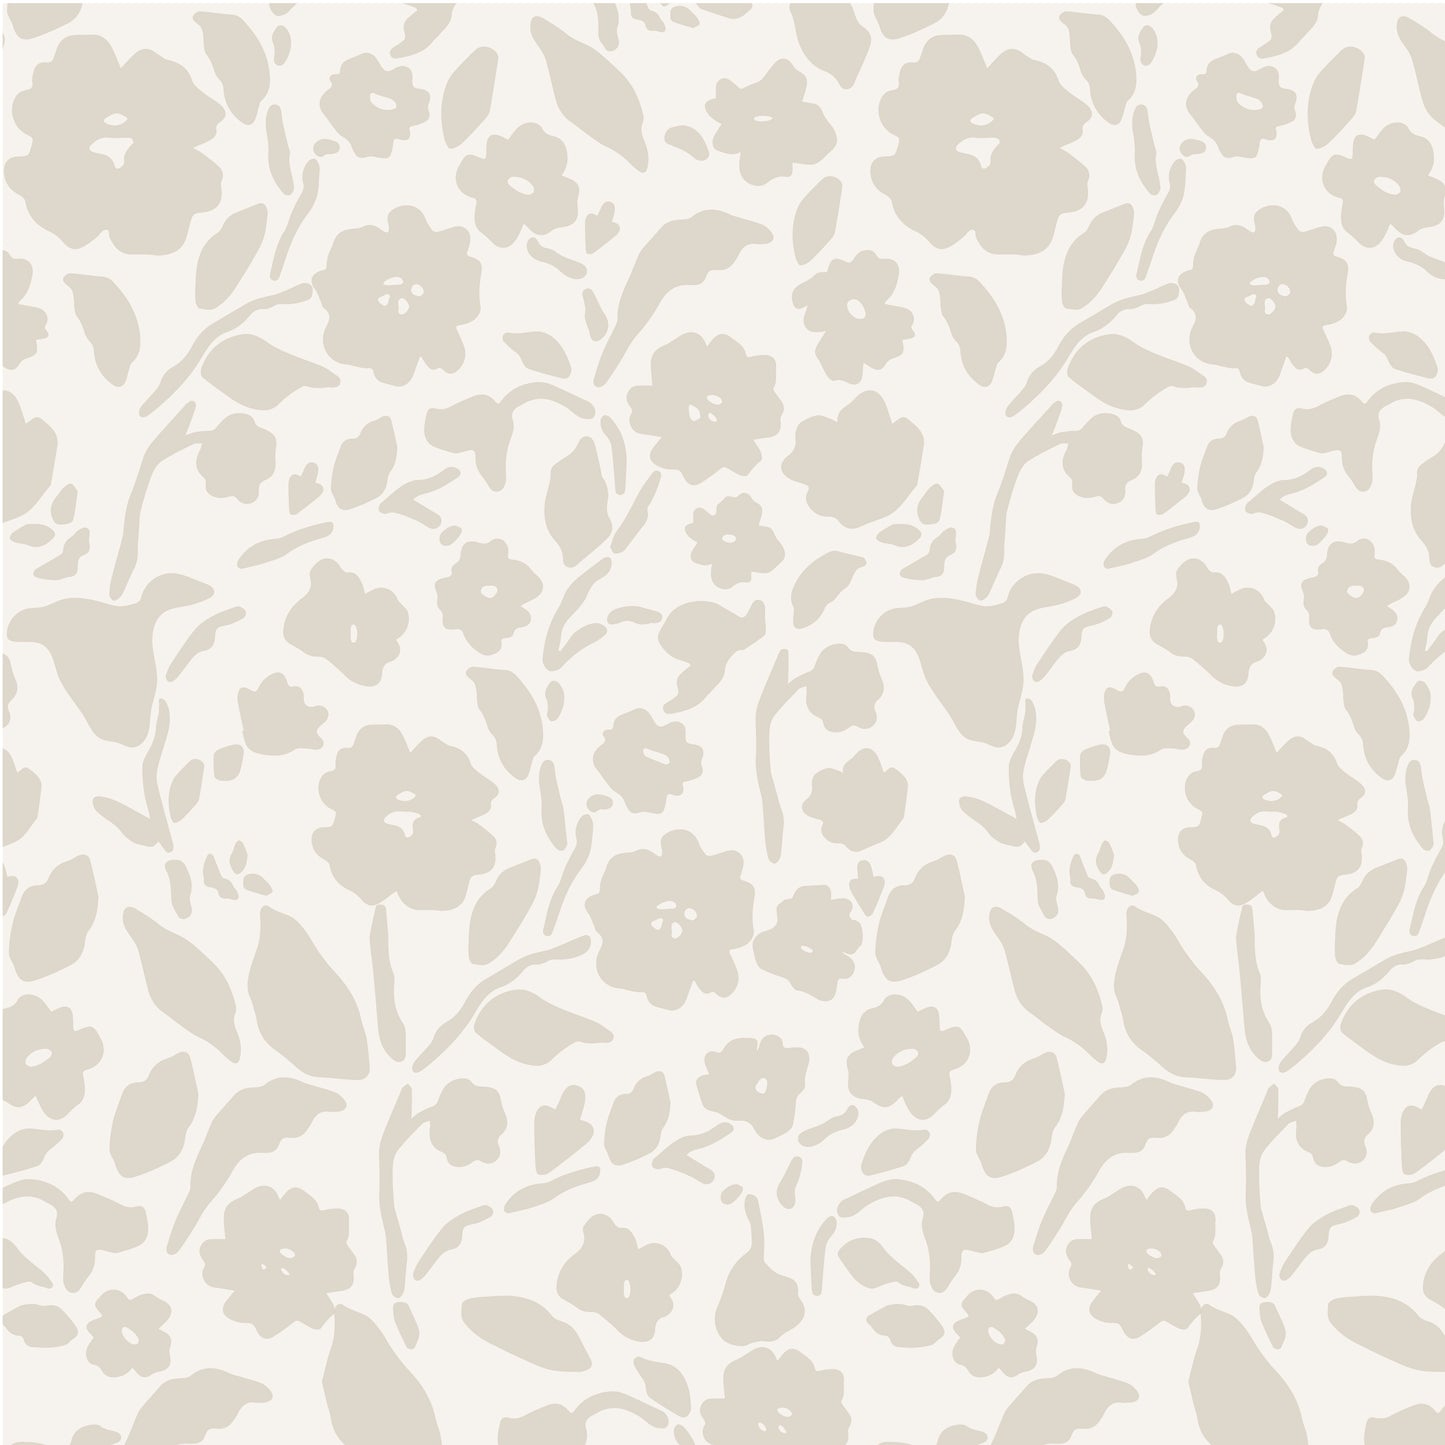 Add a touch of femininity to your space with our Lexington Wallpaper in a taupe hue shown zoomed in.